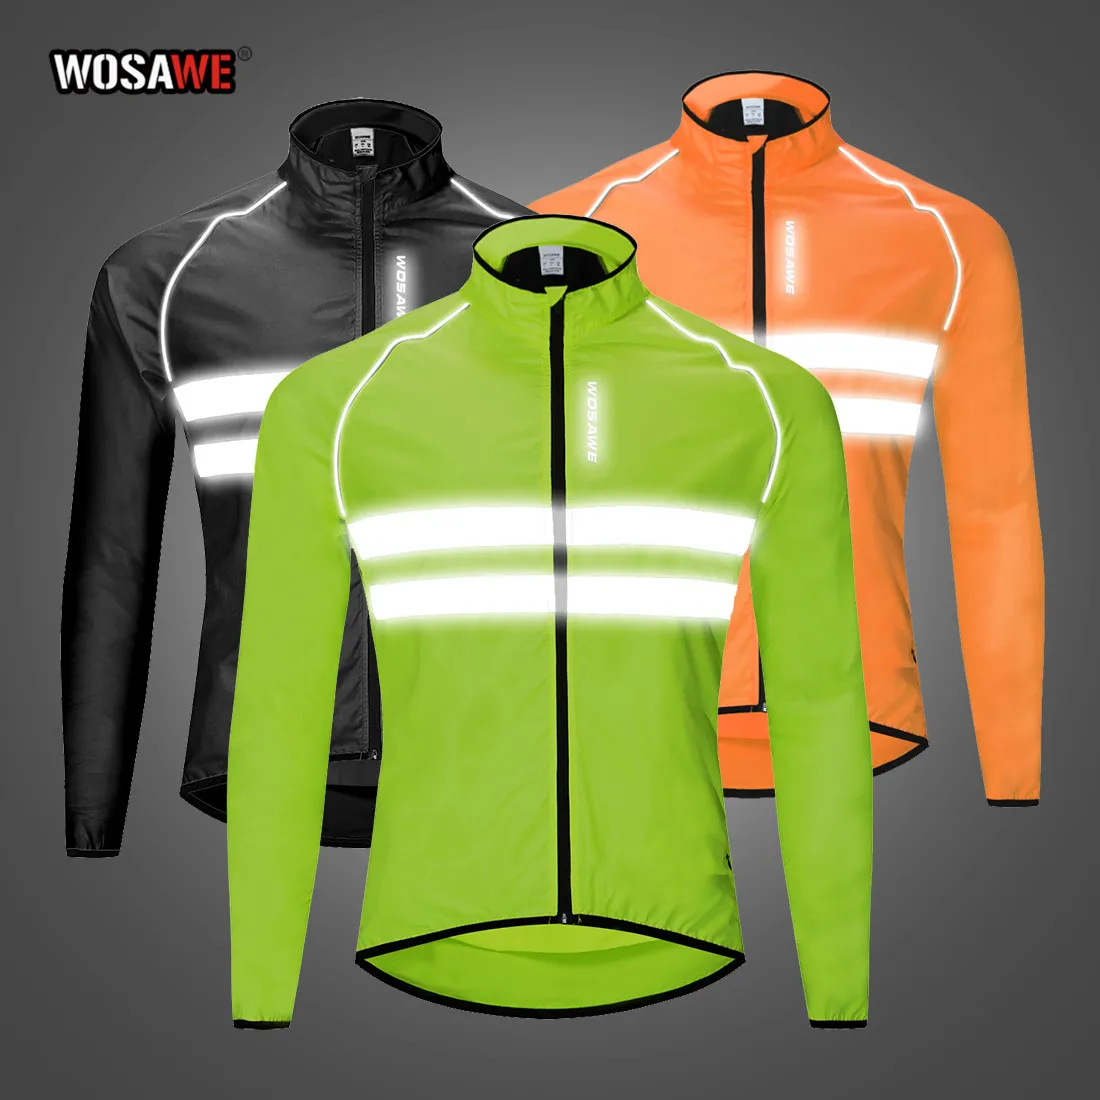 Фото WOSAWE Ultralight Reflective Safety Jacket Choths Windproof Water Repellent Safe Motorcycle Motobike Cycling Sport Clothes  Автомобили | Сигнальная одежда (33015623808)